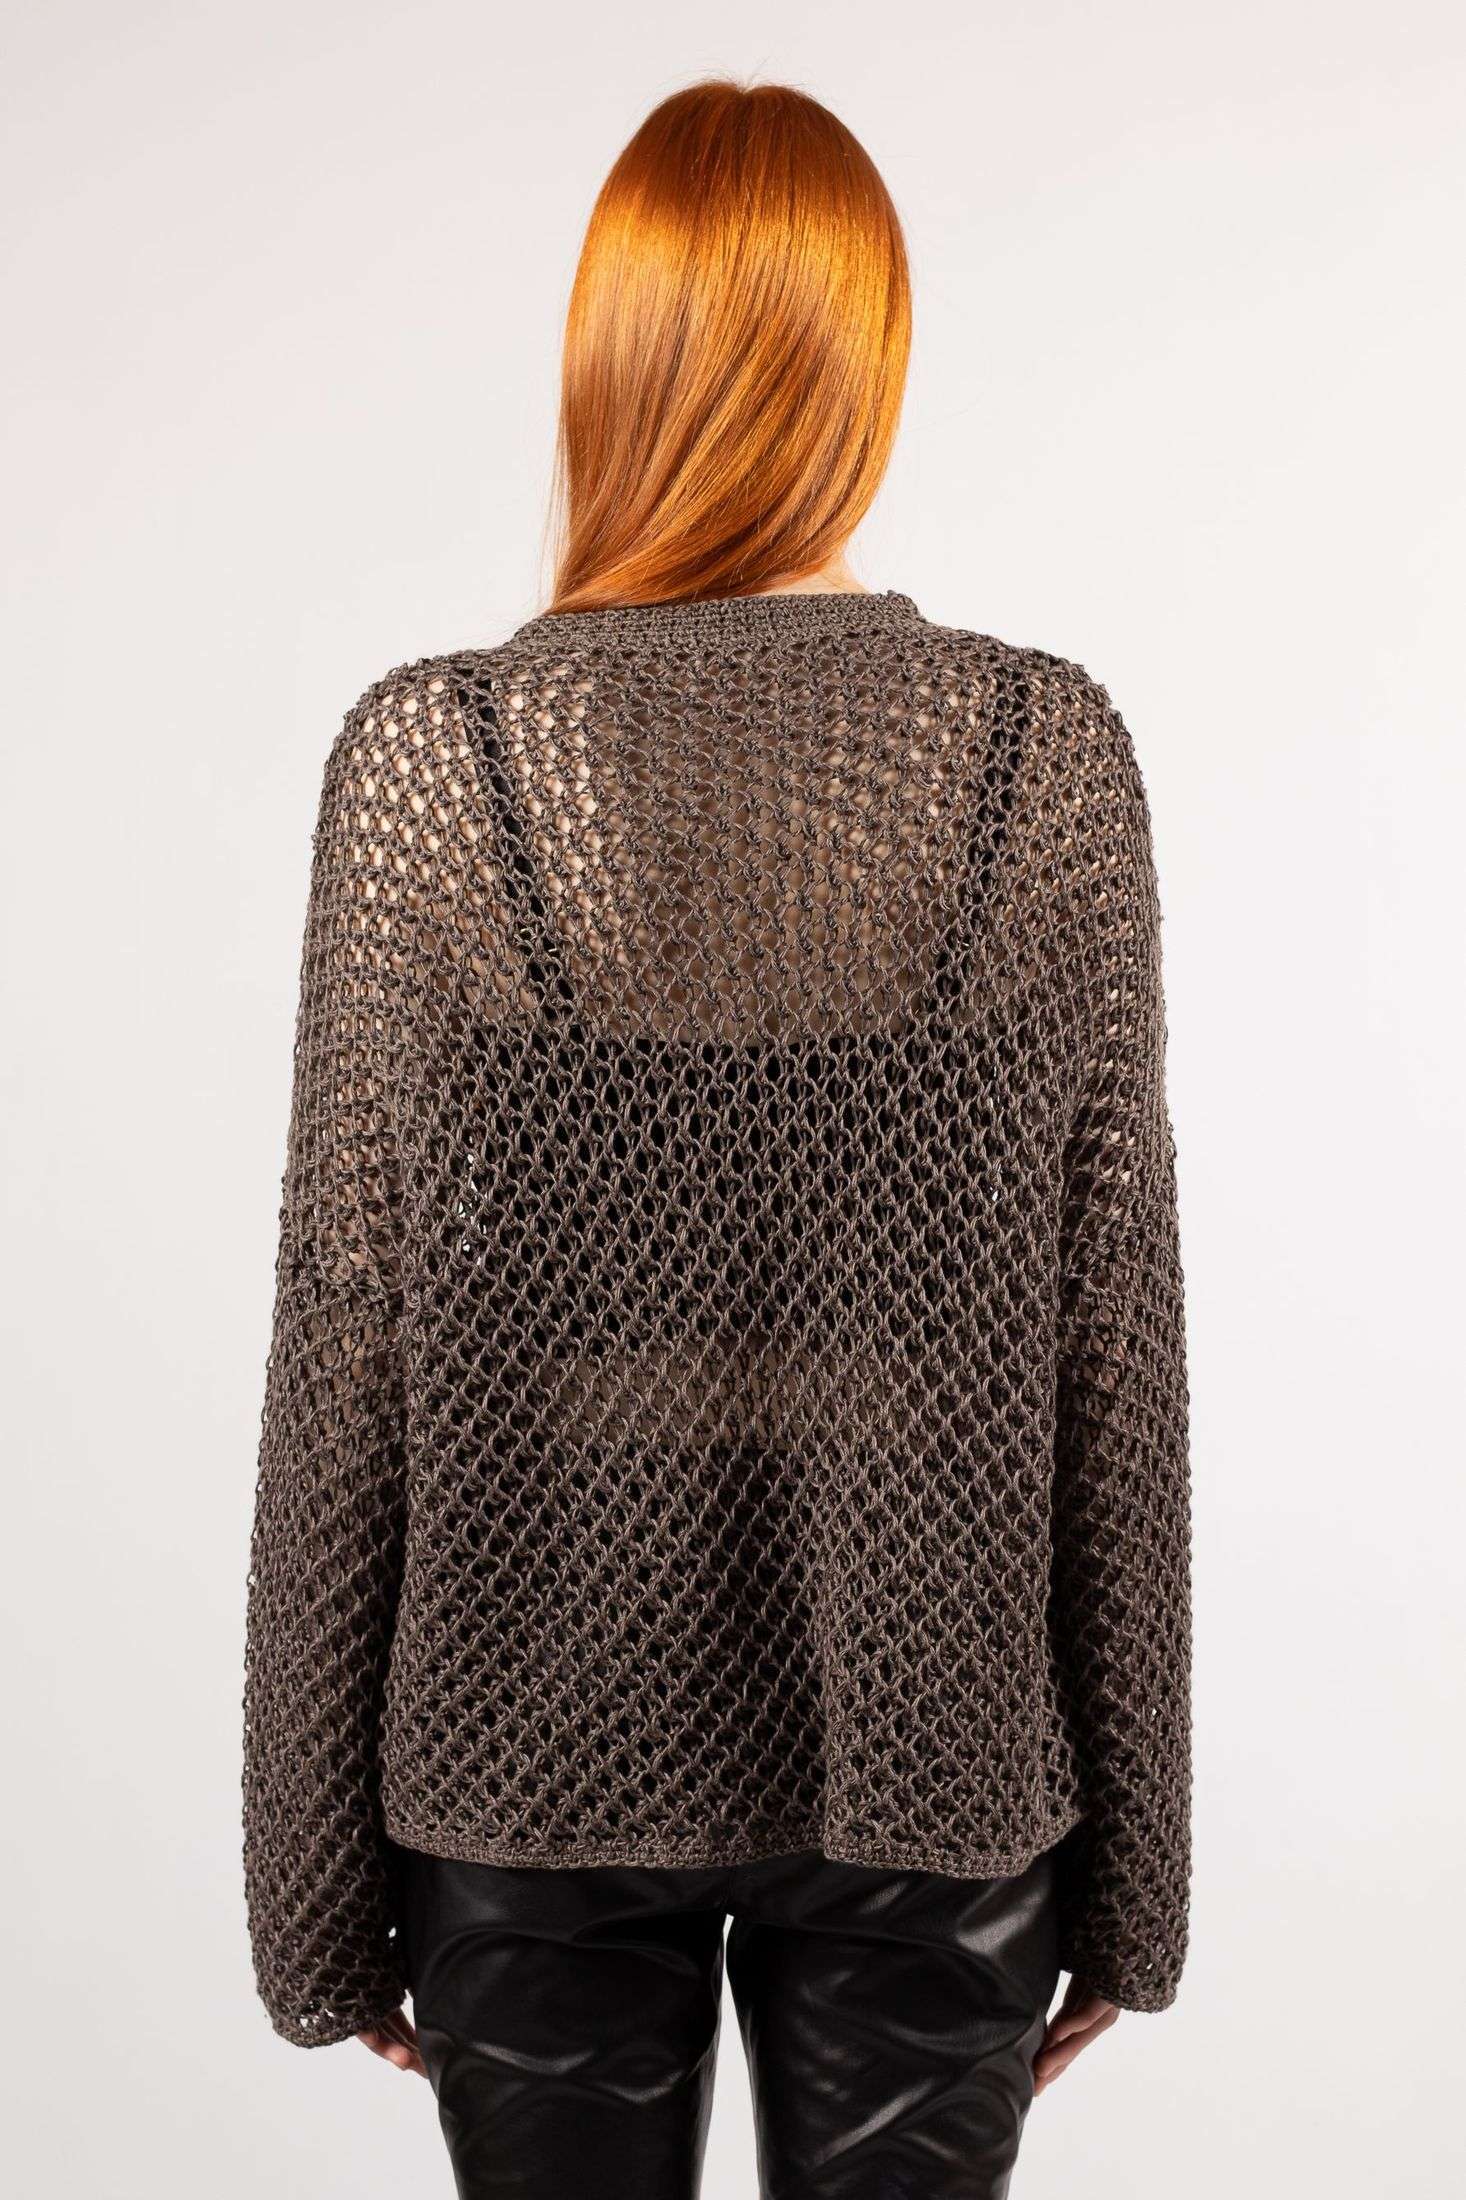 Fashionable brown knit linen sweater featuring a subtle mesh design for a trendy outfit.